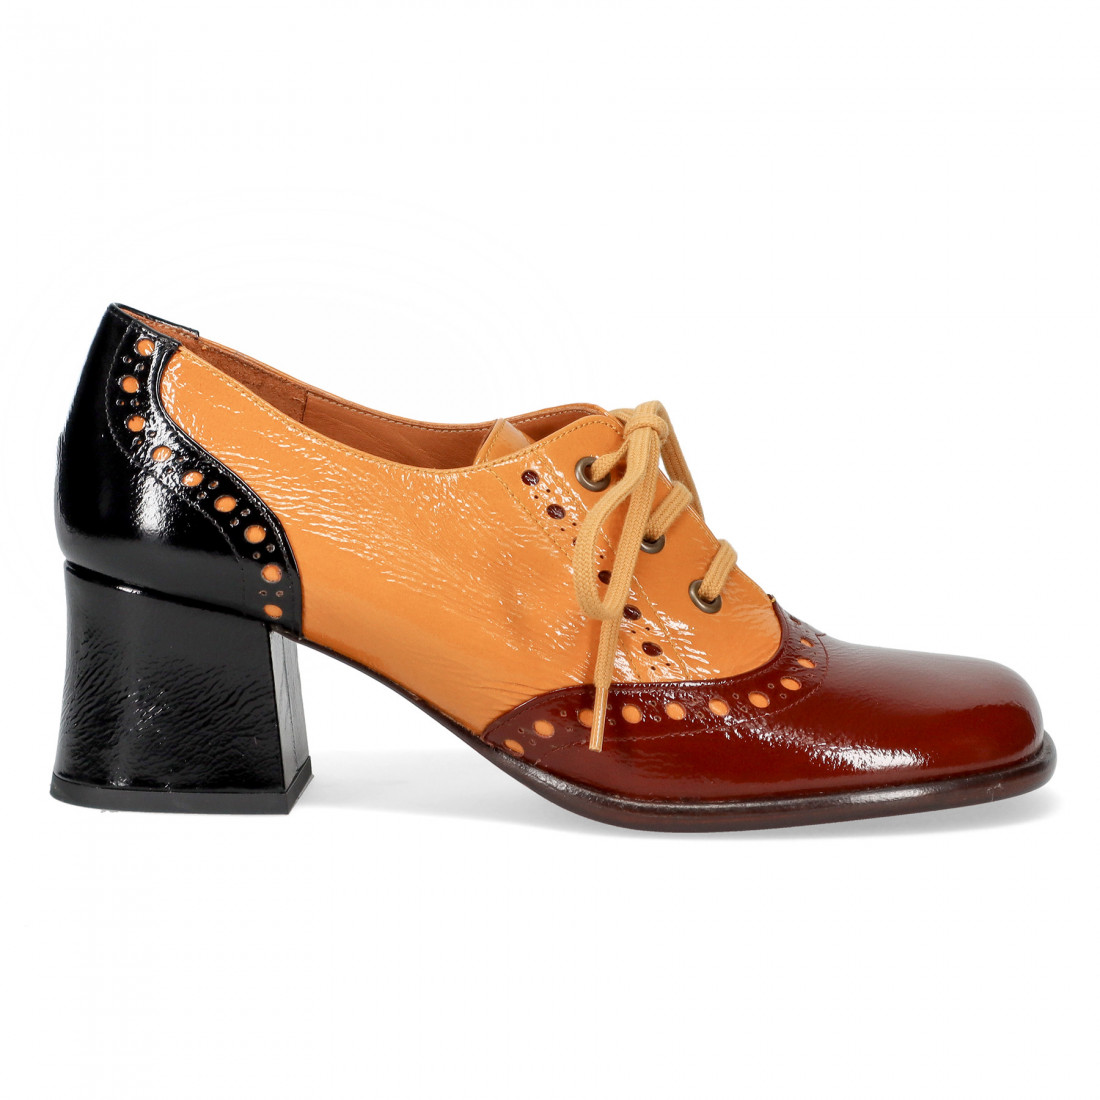 Chie Mihara Mikado yellow, red and black lace up heeled shoe